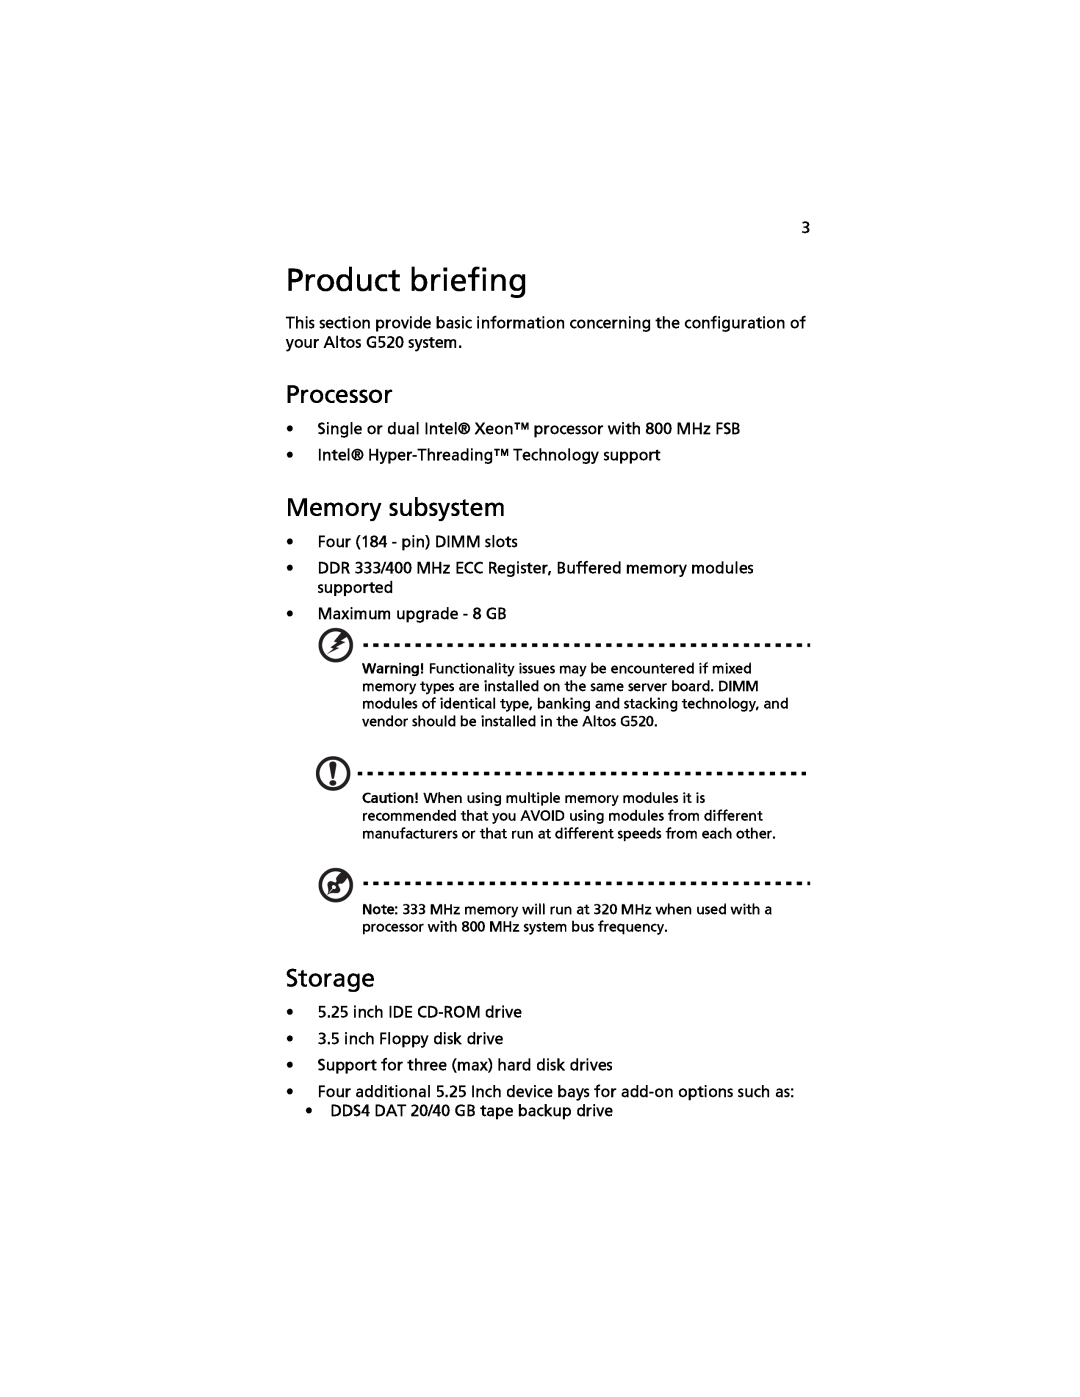 Acer G520 series manual Product briefing, Processor, Memory subsystem, Storage 